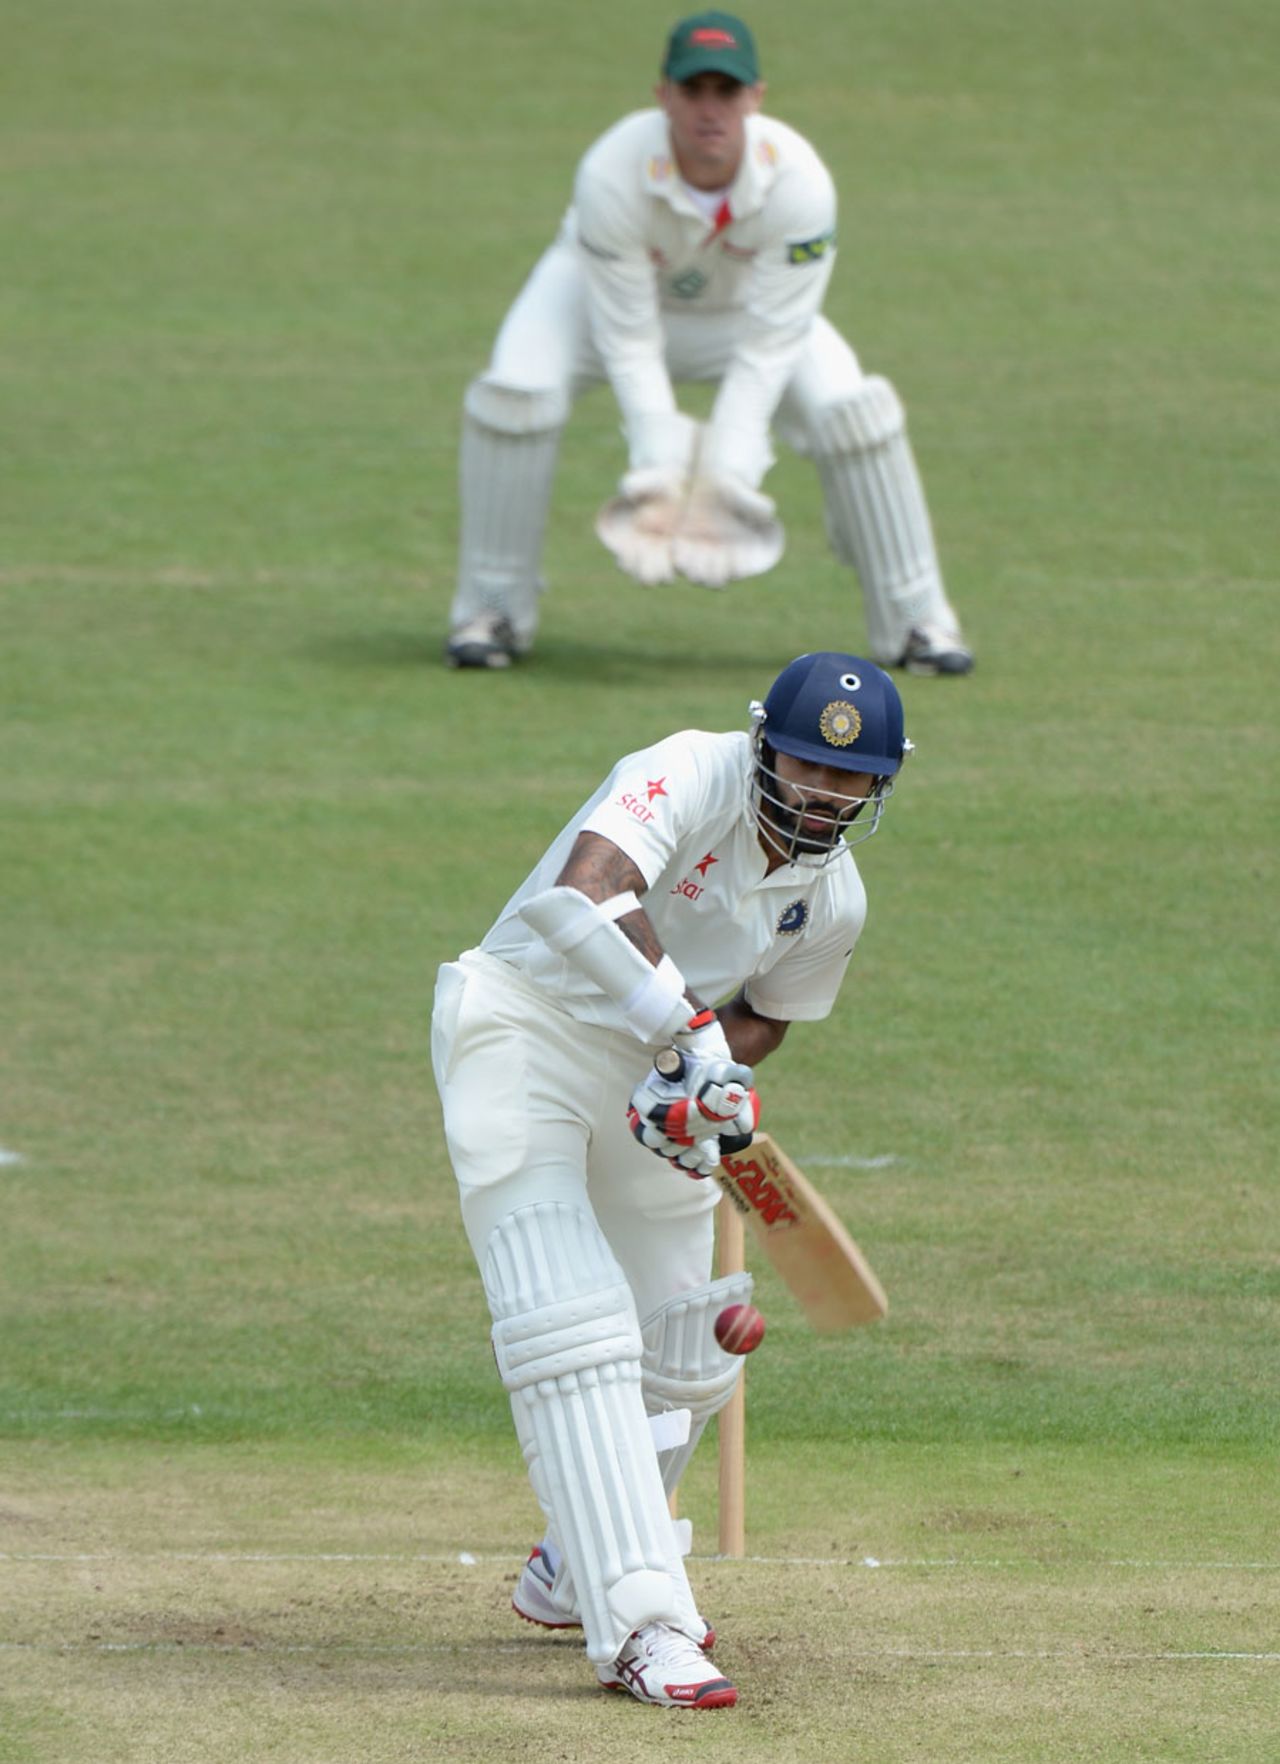 Shikhar Dhawan took the attack to the Leicestershire bowlers on day one, Leicestershire v Indians, Leicester, 1st day, June 26, 2014